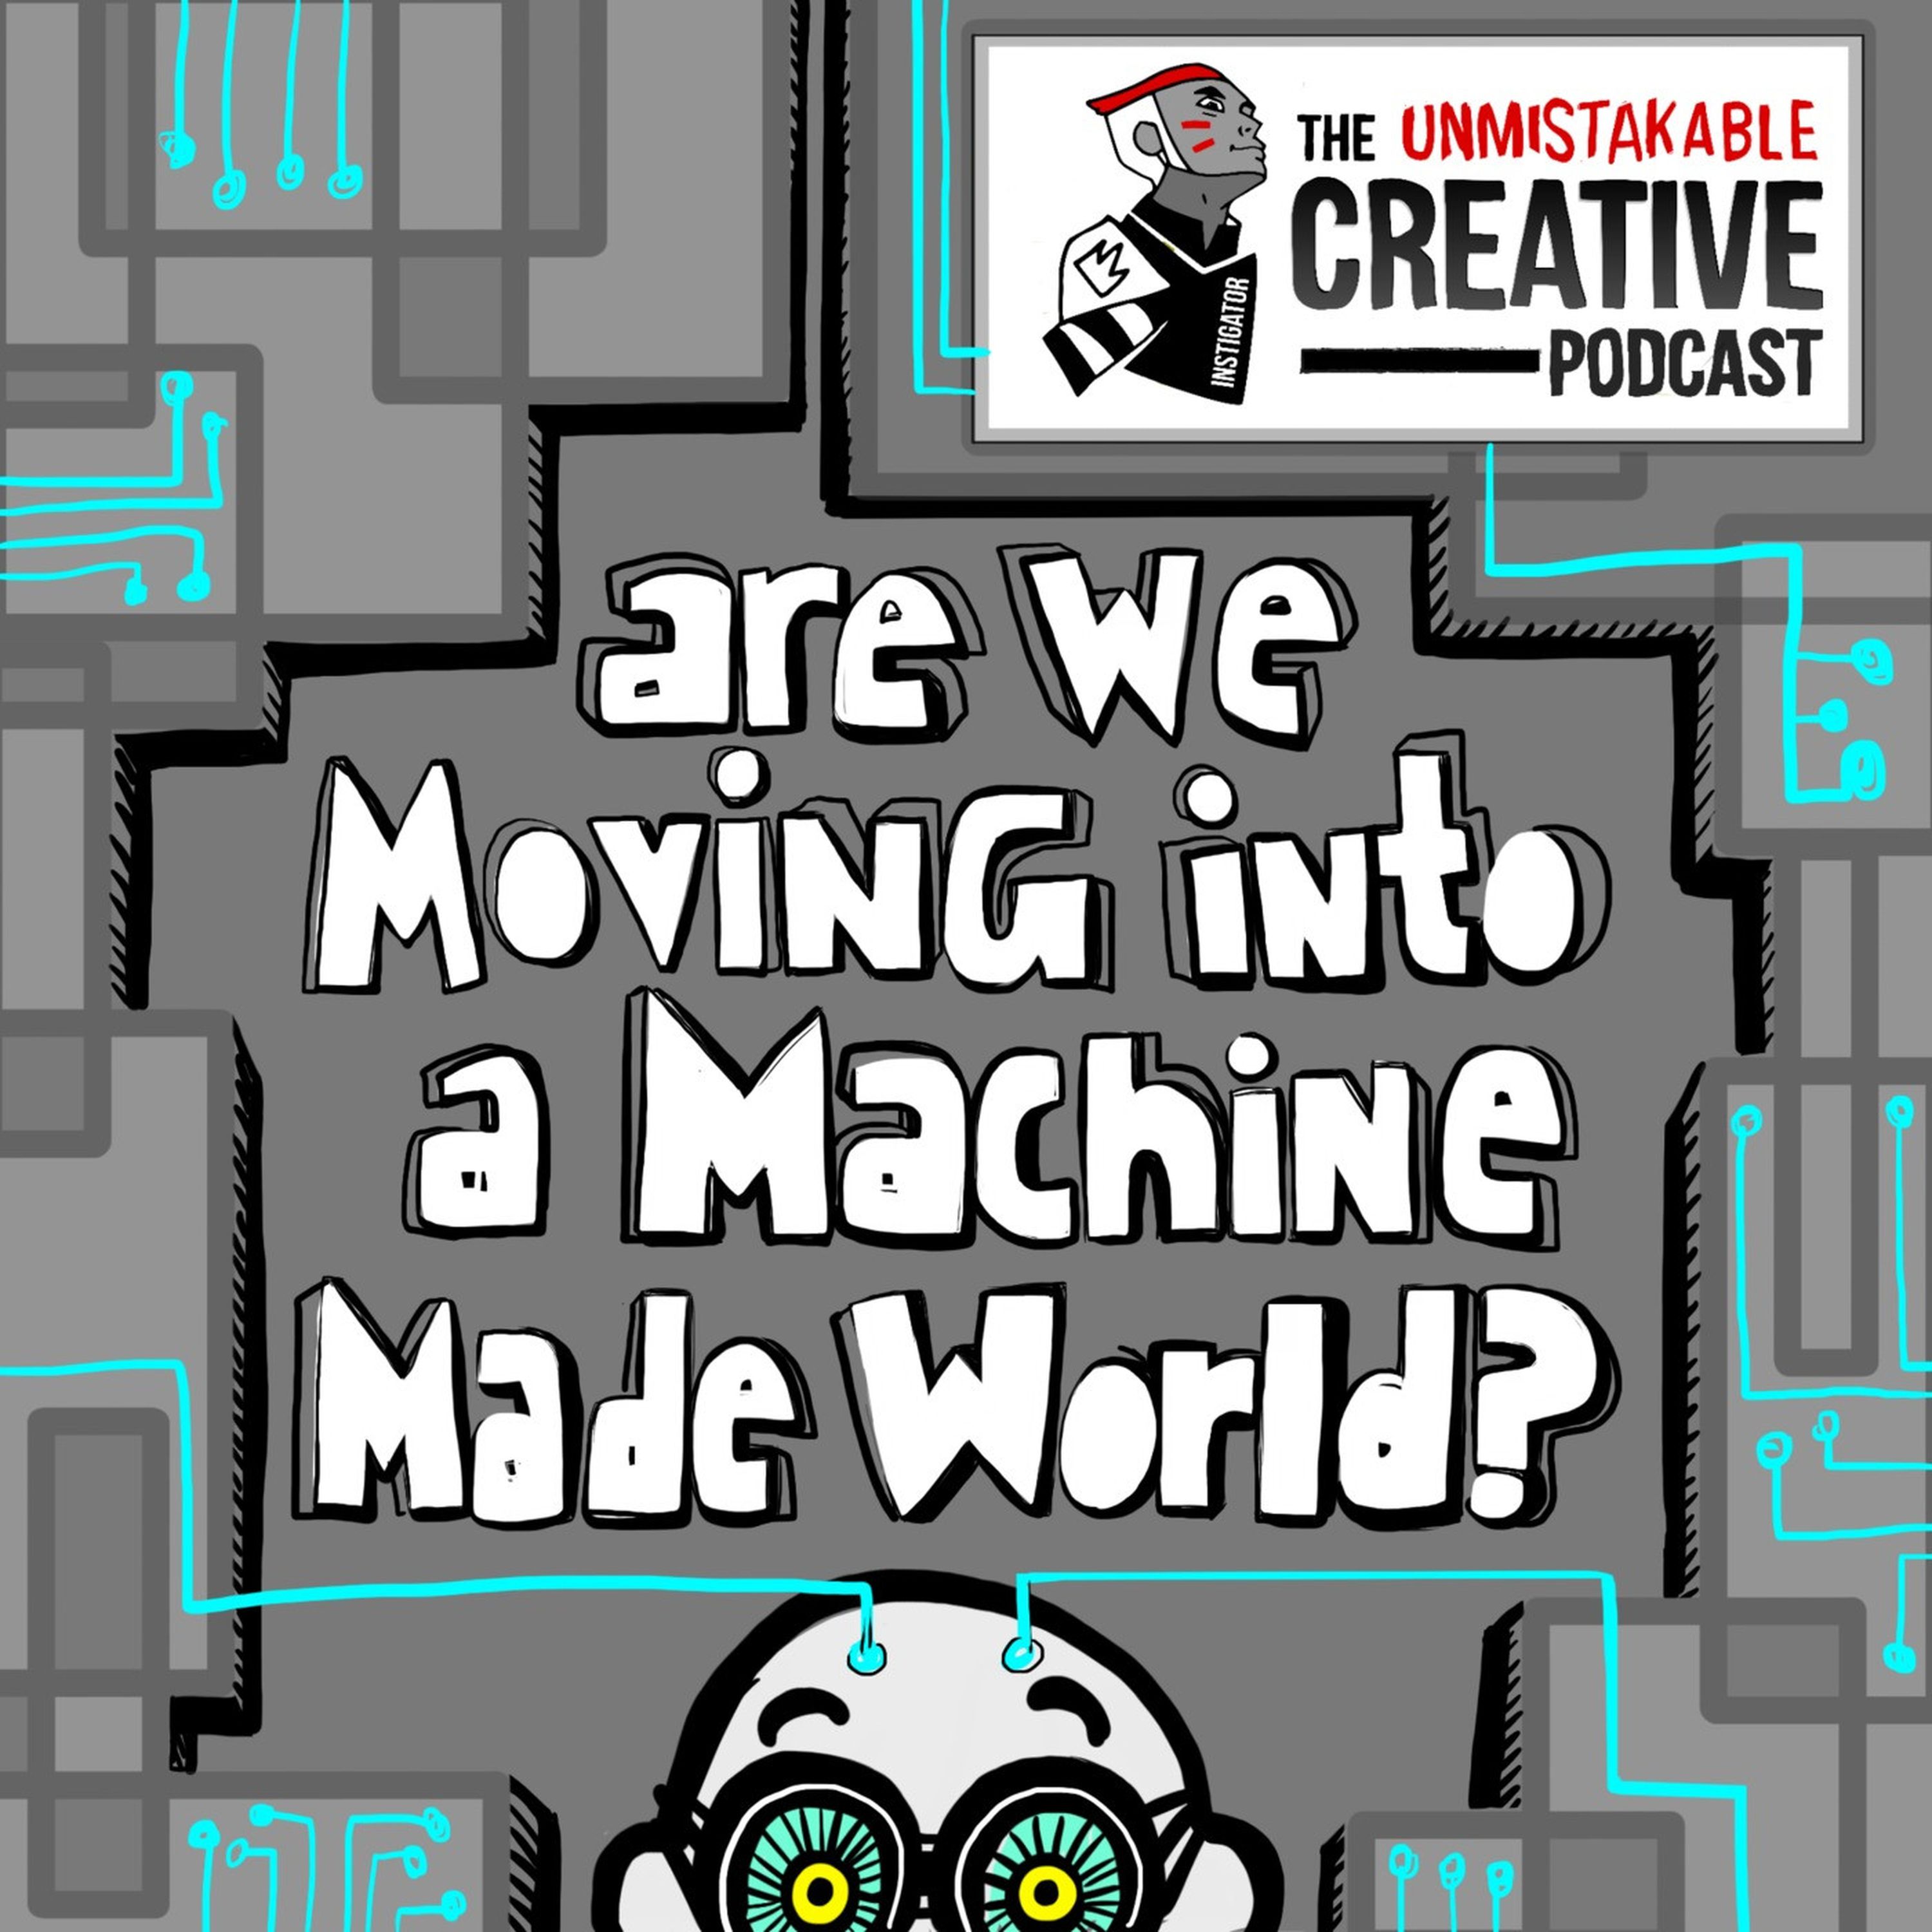 Are We Moving To a Machine Made World? Image